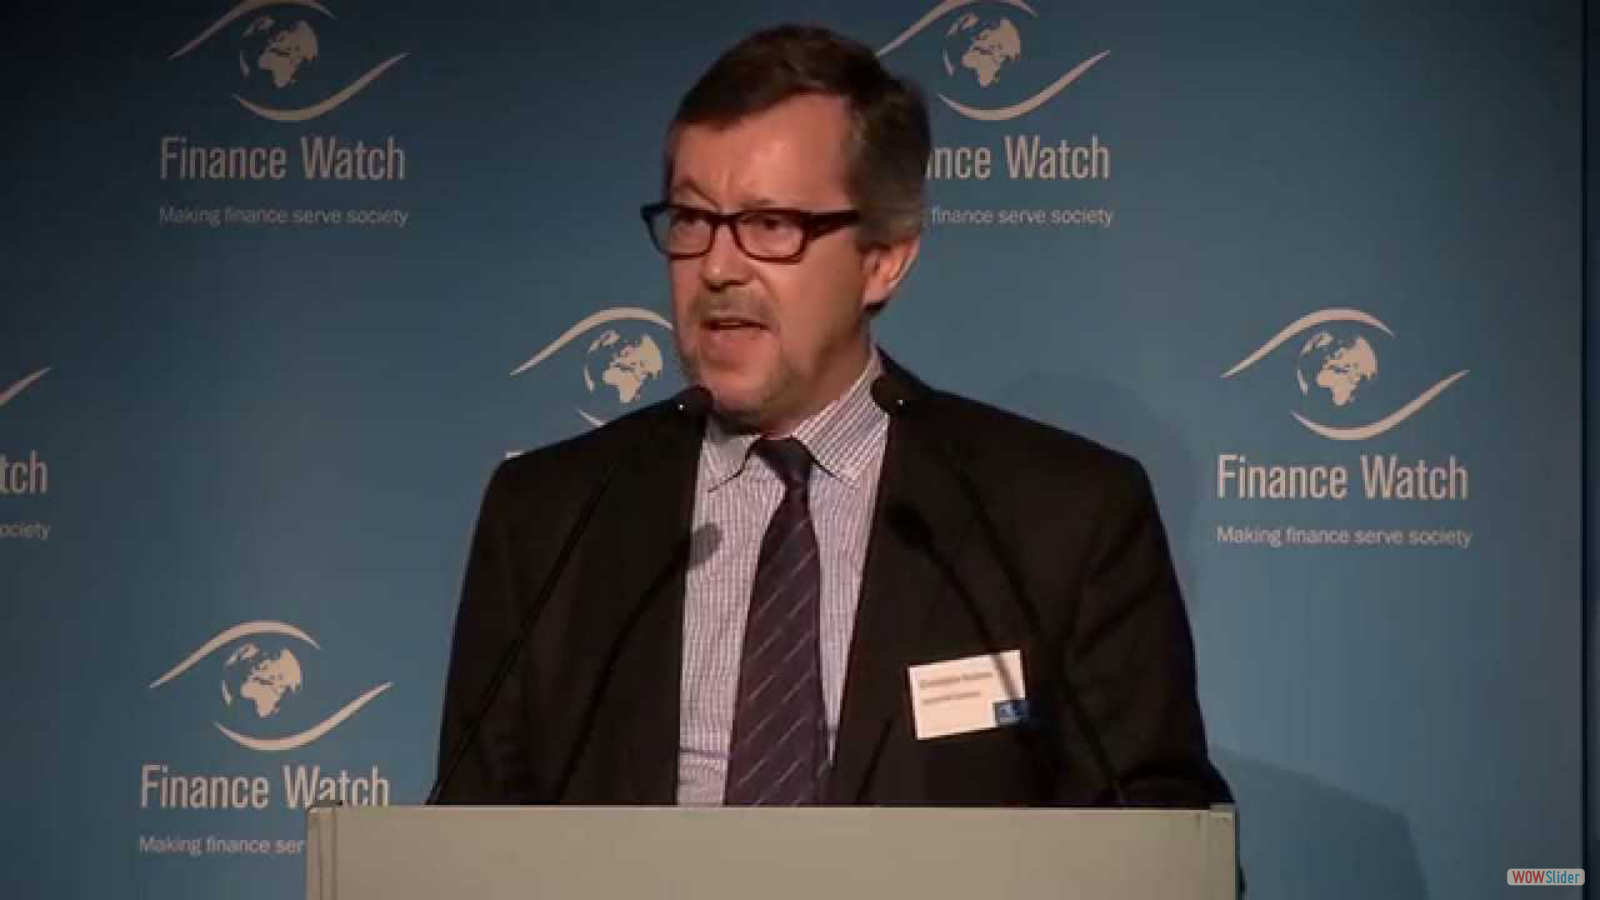 Finance Watch conference, February 2015